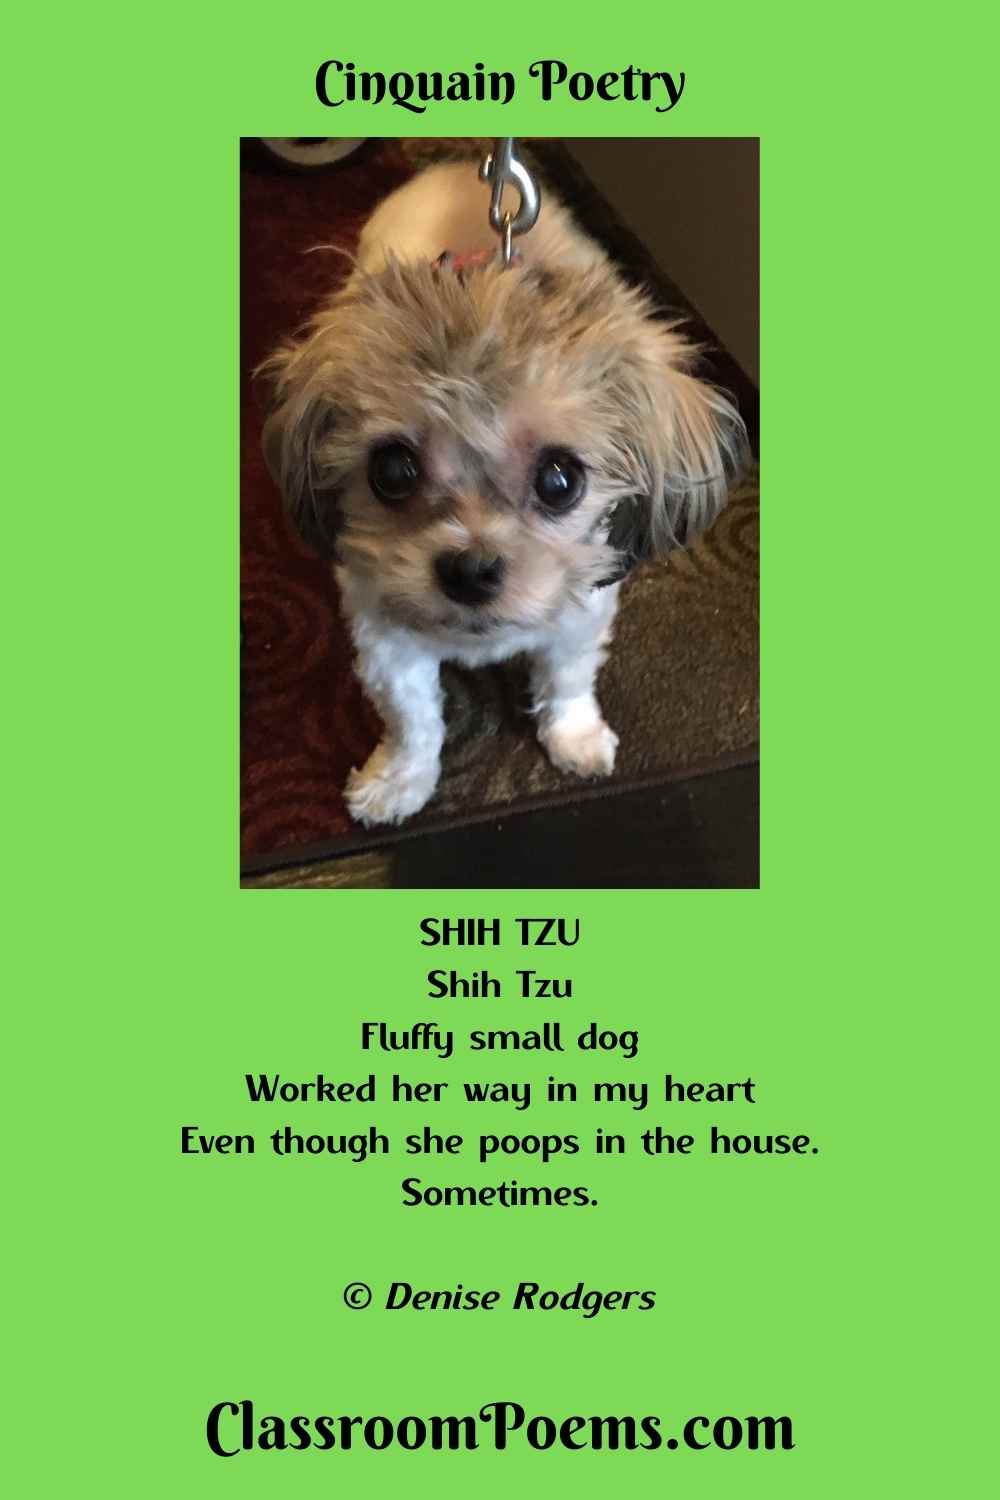 Shih Tzu Cinquain Poem by the Poetry Lady Denise Rodgers on ClassroomPoems.com.